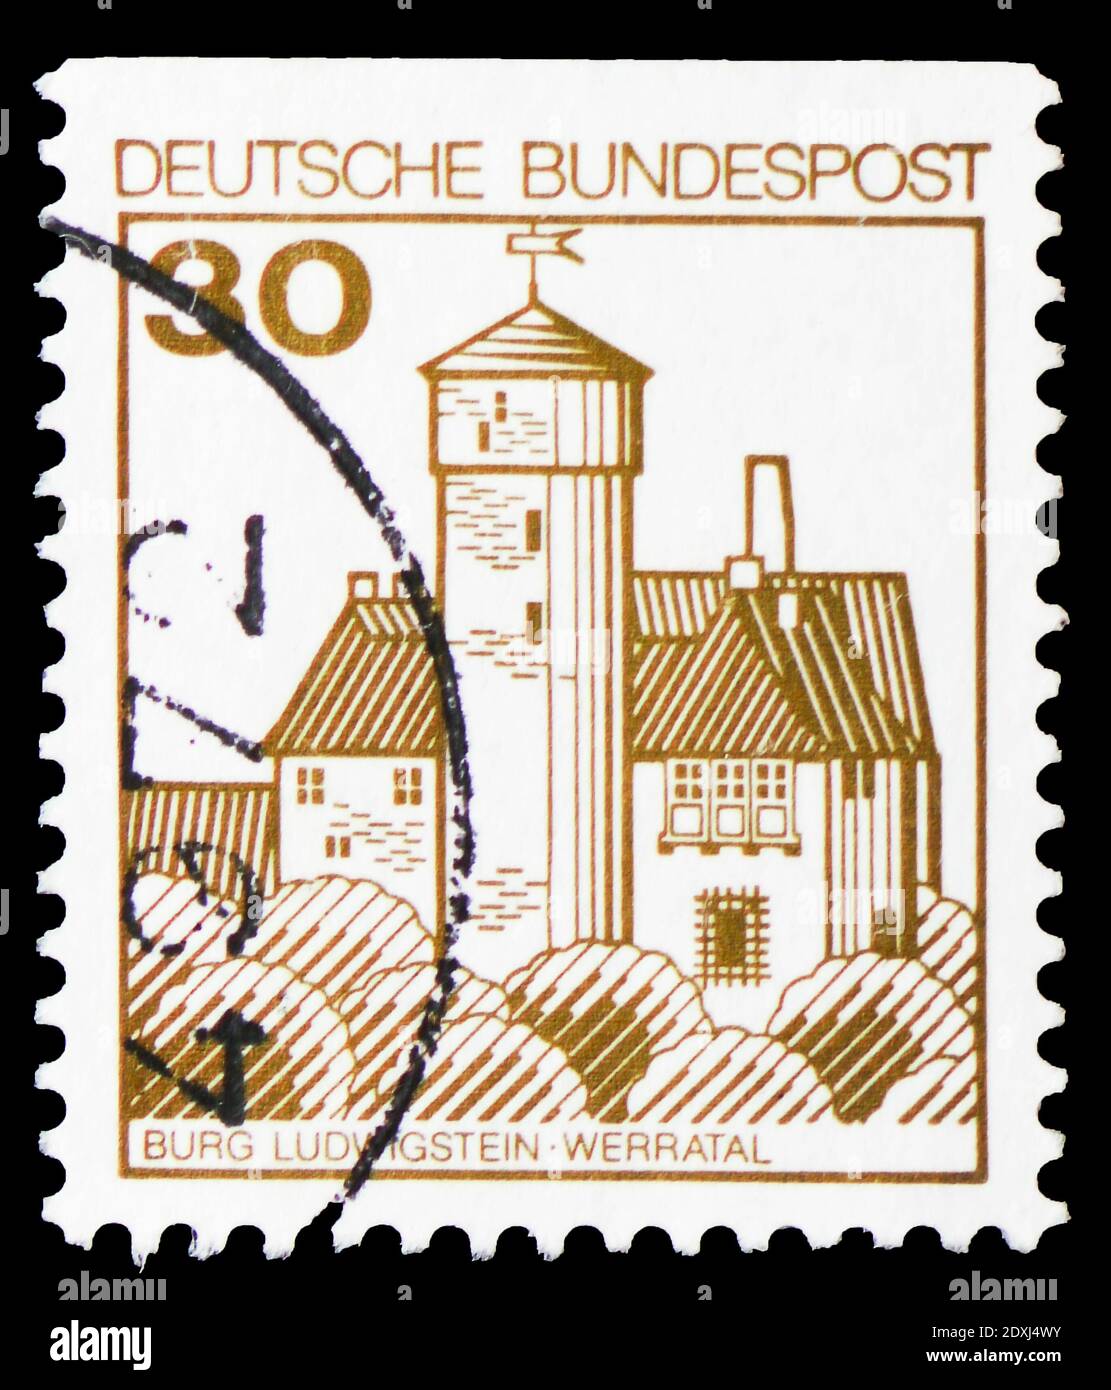 MOSCOW, RUSSIA - MARCH 23, 2019: Postage stamp printed in Germany, Federal Republic shows Ludwigstein Castle, Werra valley, Strongholds and Castles se Stock Photo